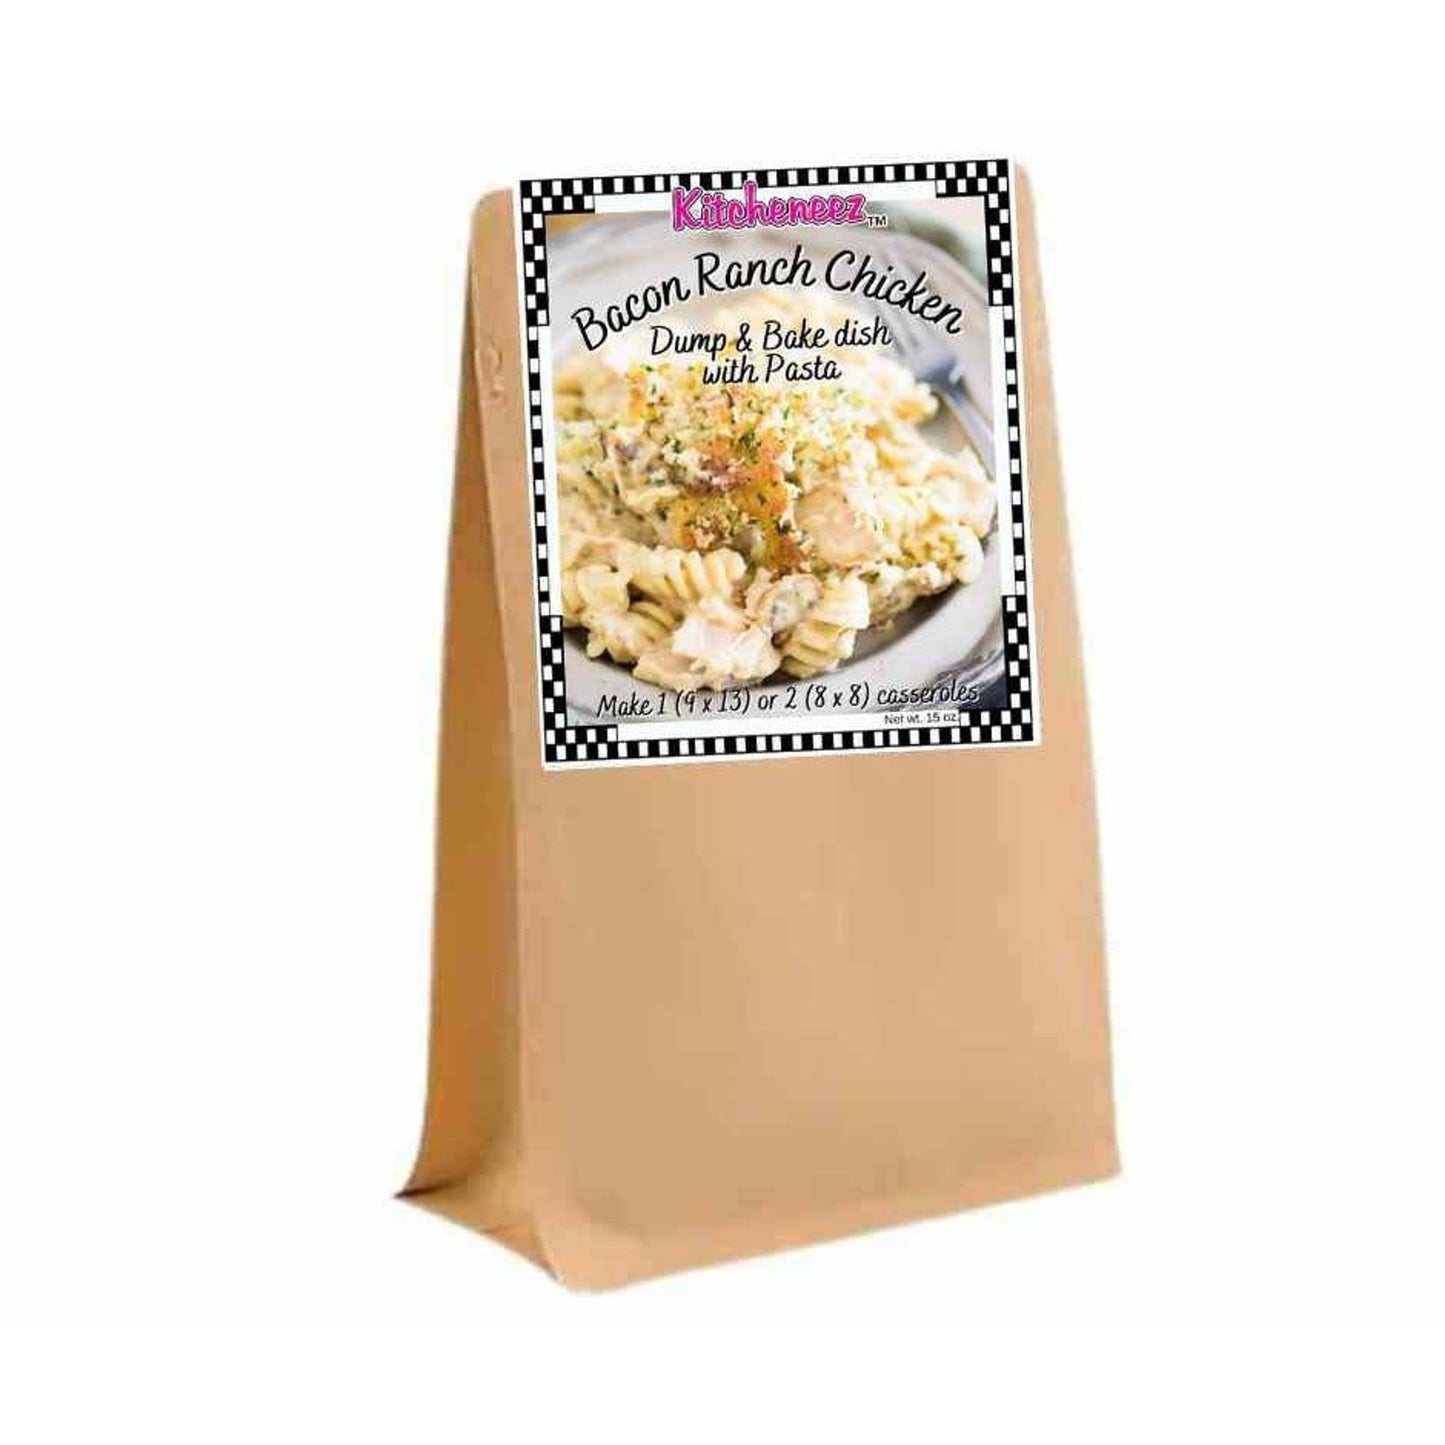 Bacon Ranch Chicken Dump 'n Bake Meal with pasta included - Kitcheneez Mixes & More!